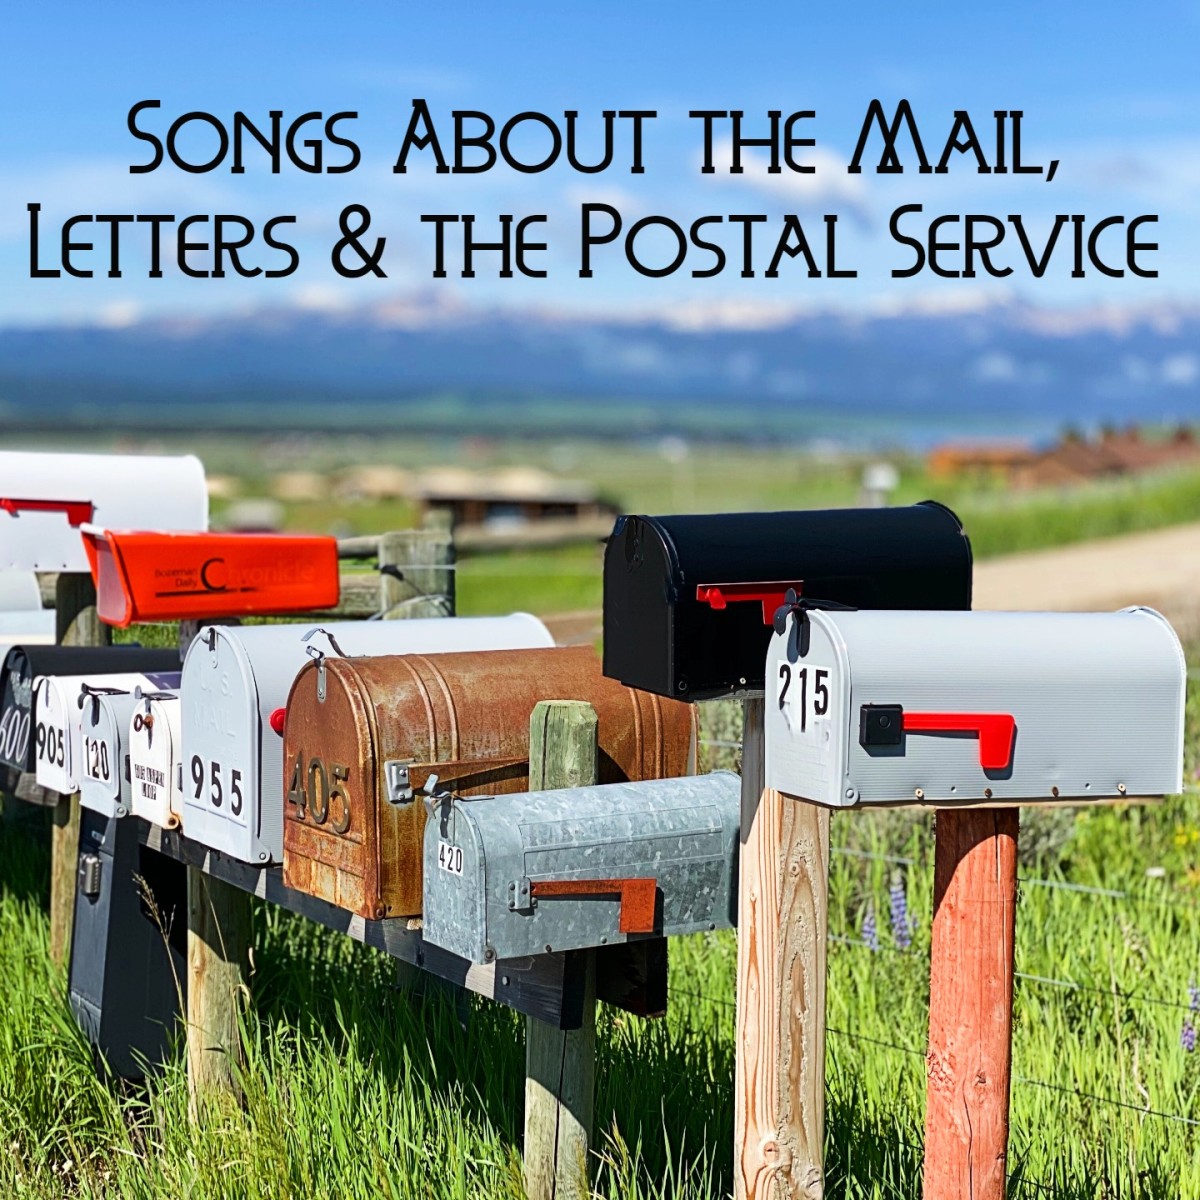 Celebrate writing, sending, and receiving letters and postcards through the postal service with a pop, rock, country, and R&B playlist of songs about snail mail. 